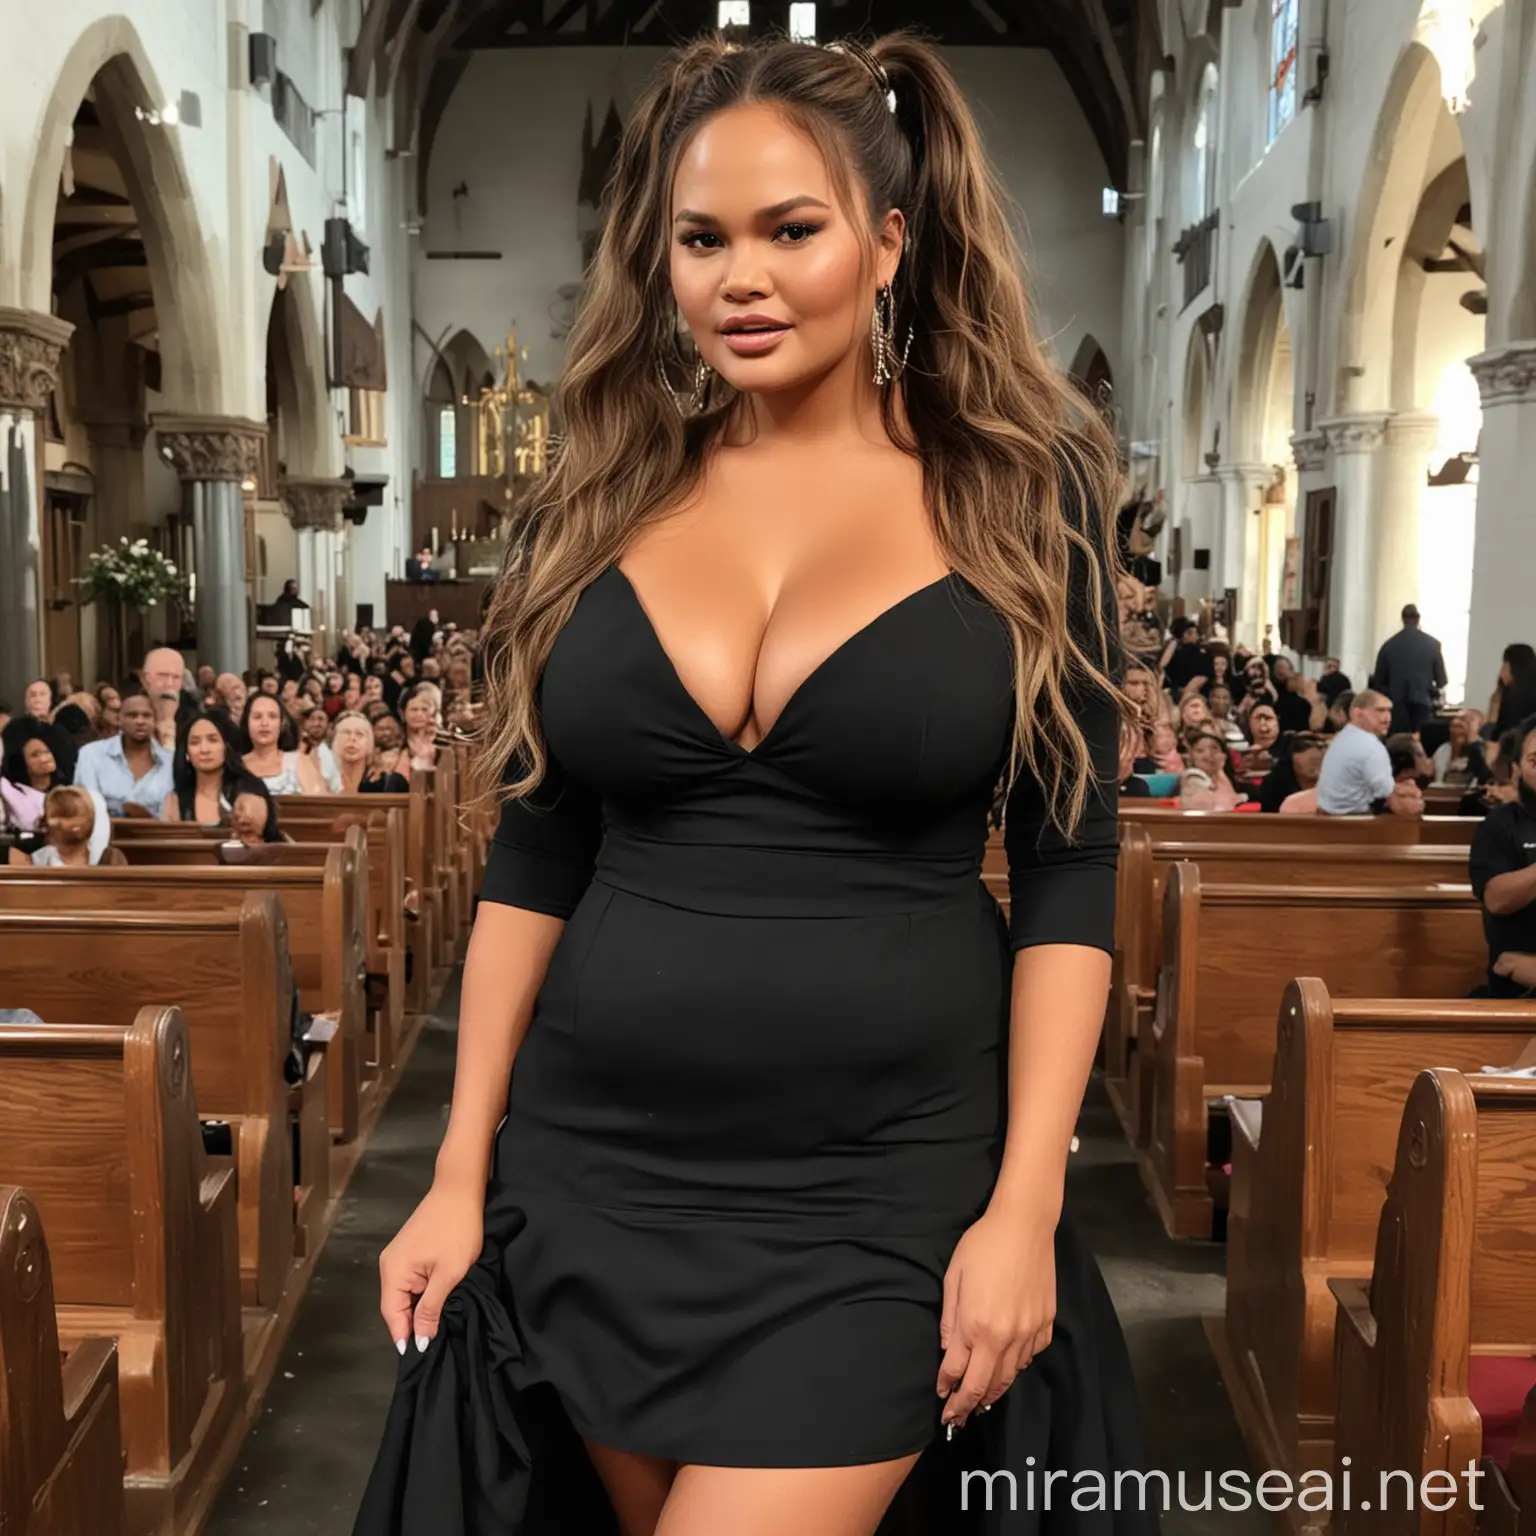 Chrissy Teigen Black Dress Church Appearance with Bold Cleavage